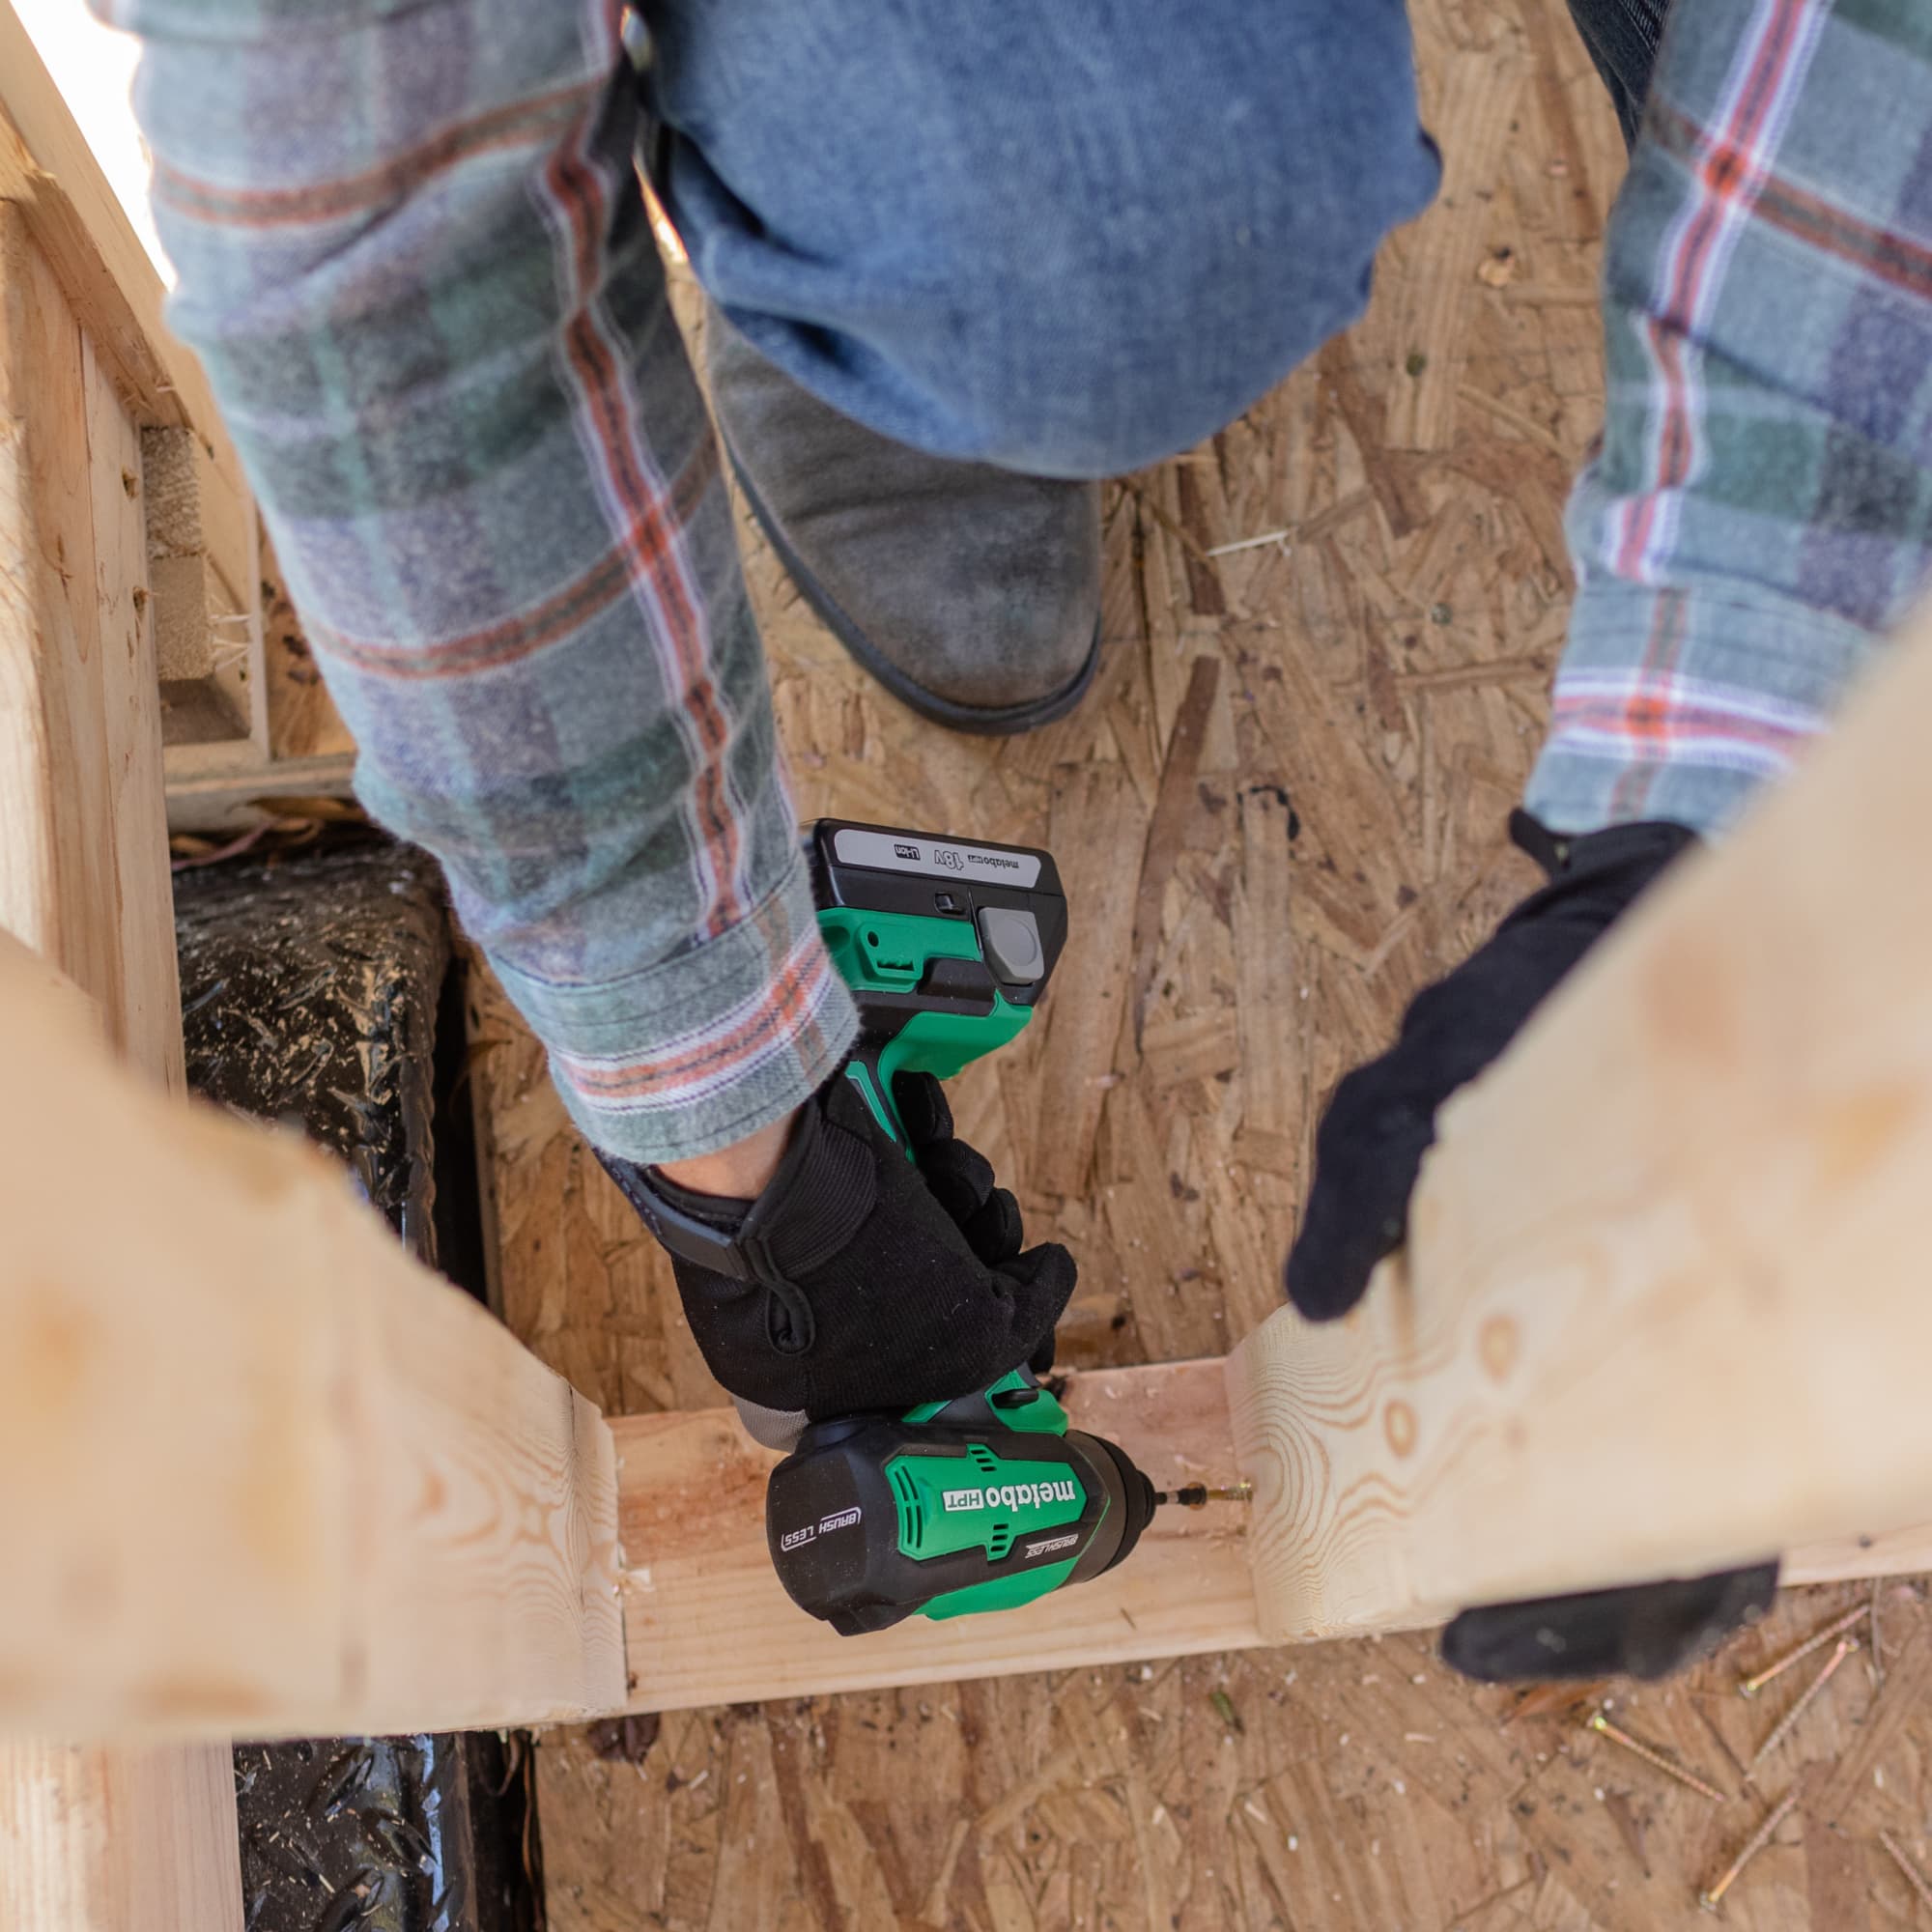 Metabo HPT MultiVolt 18-volt 1/4-in Variable Speed Brushless Cordless Impact Driver (2-Batteries Included)